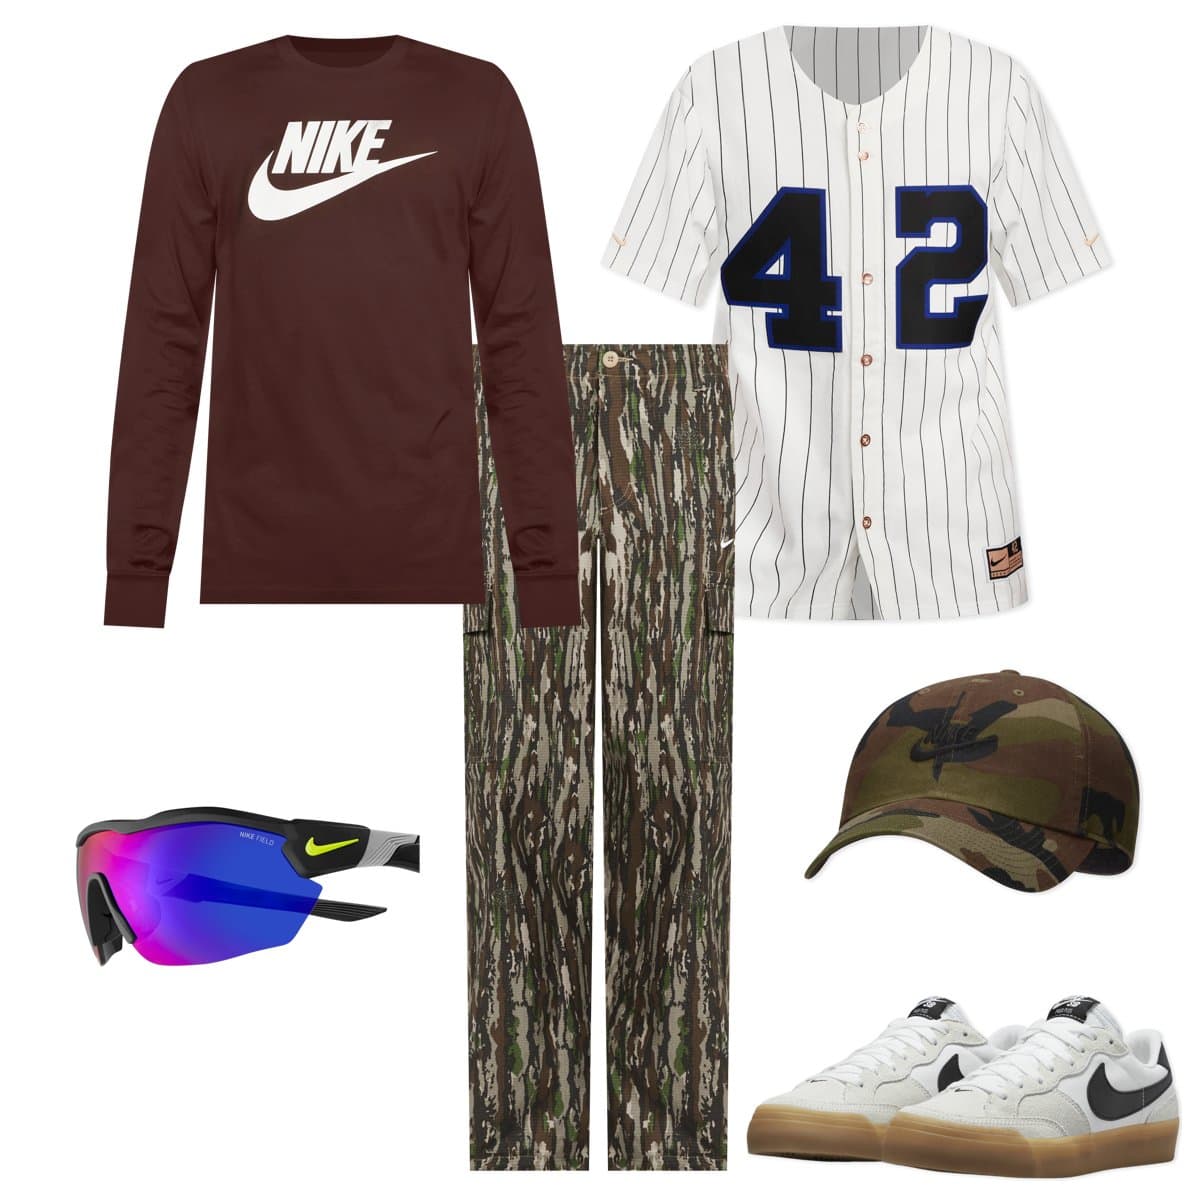 rangers game outfit ideas